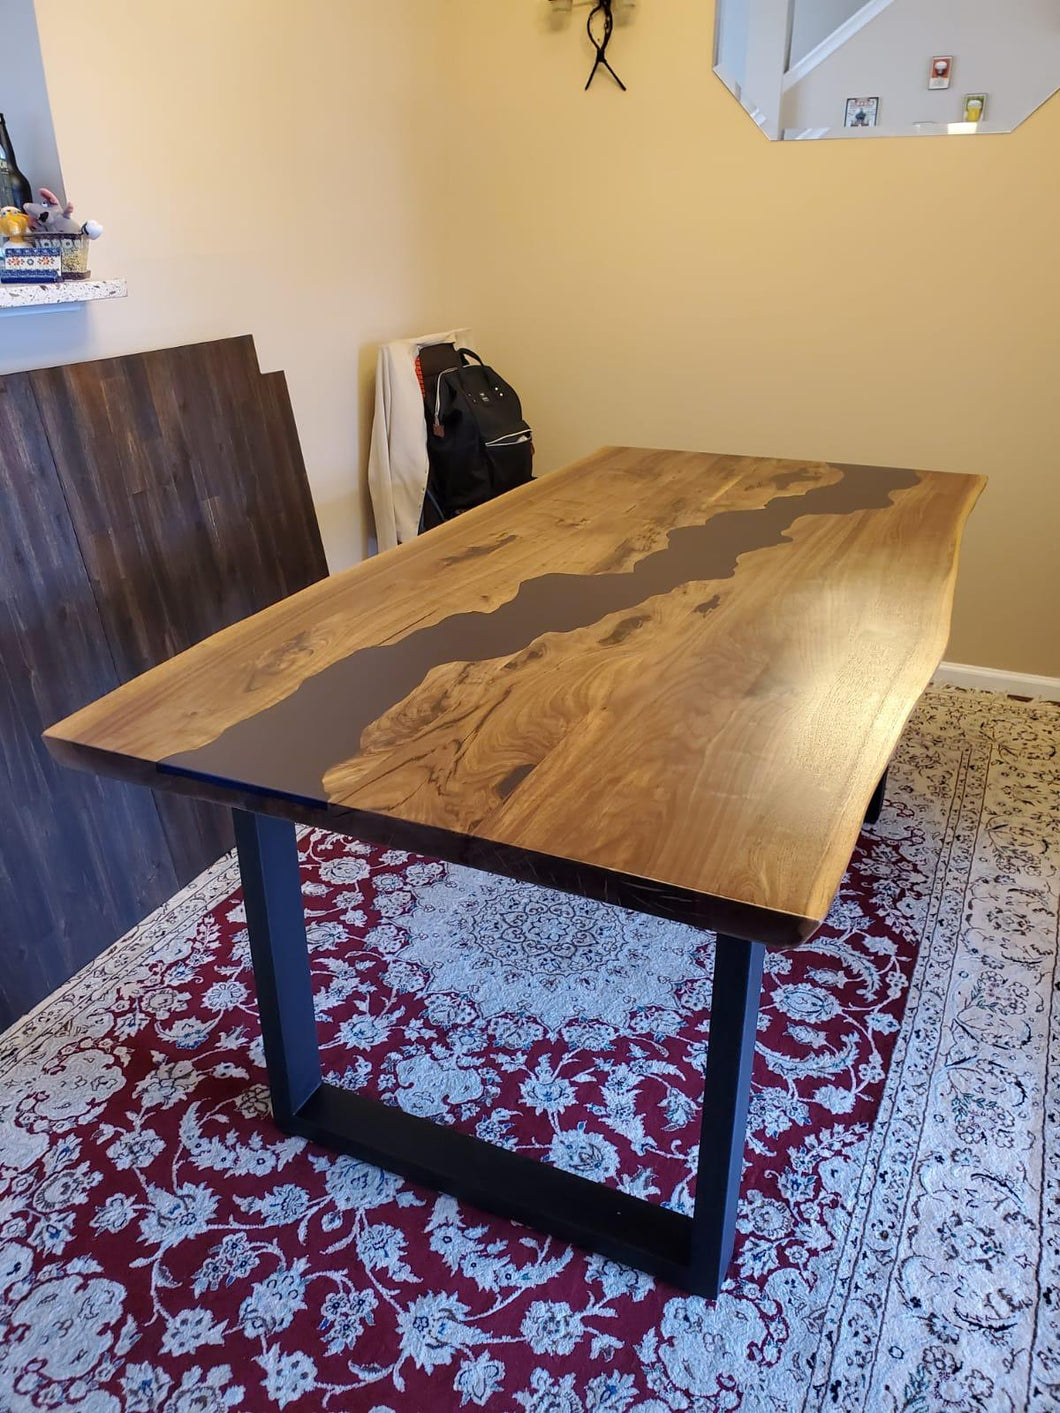 Live edge acacia wood dining table with epoxy